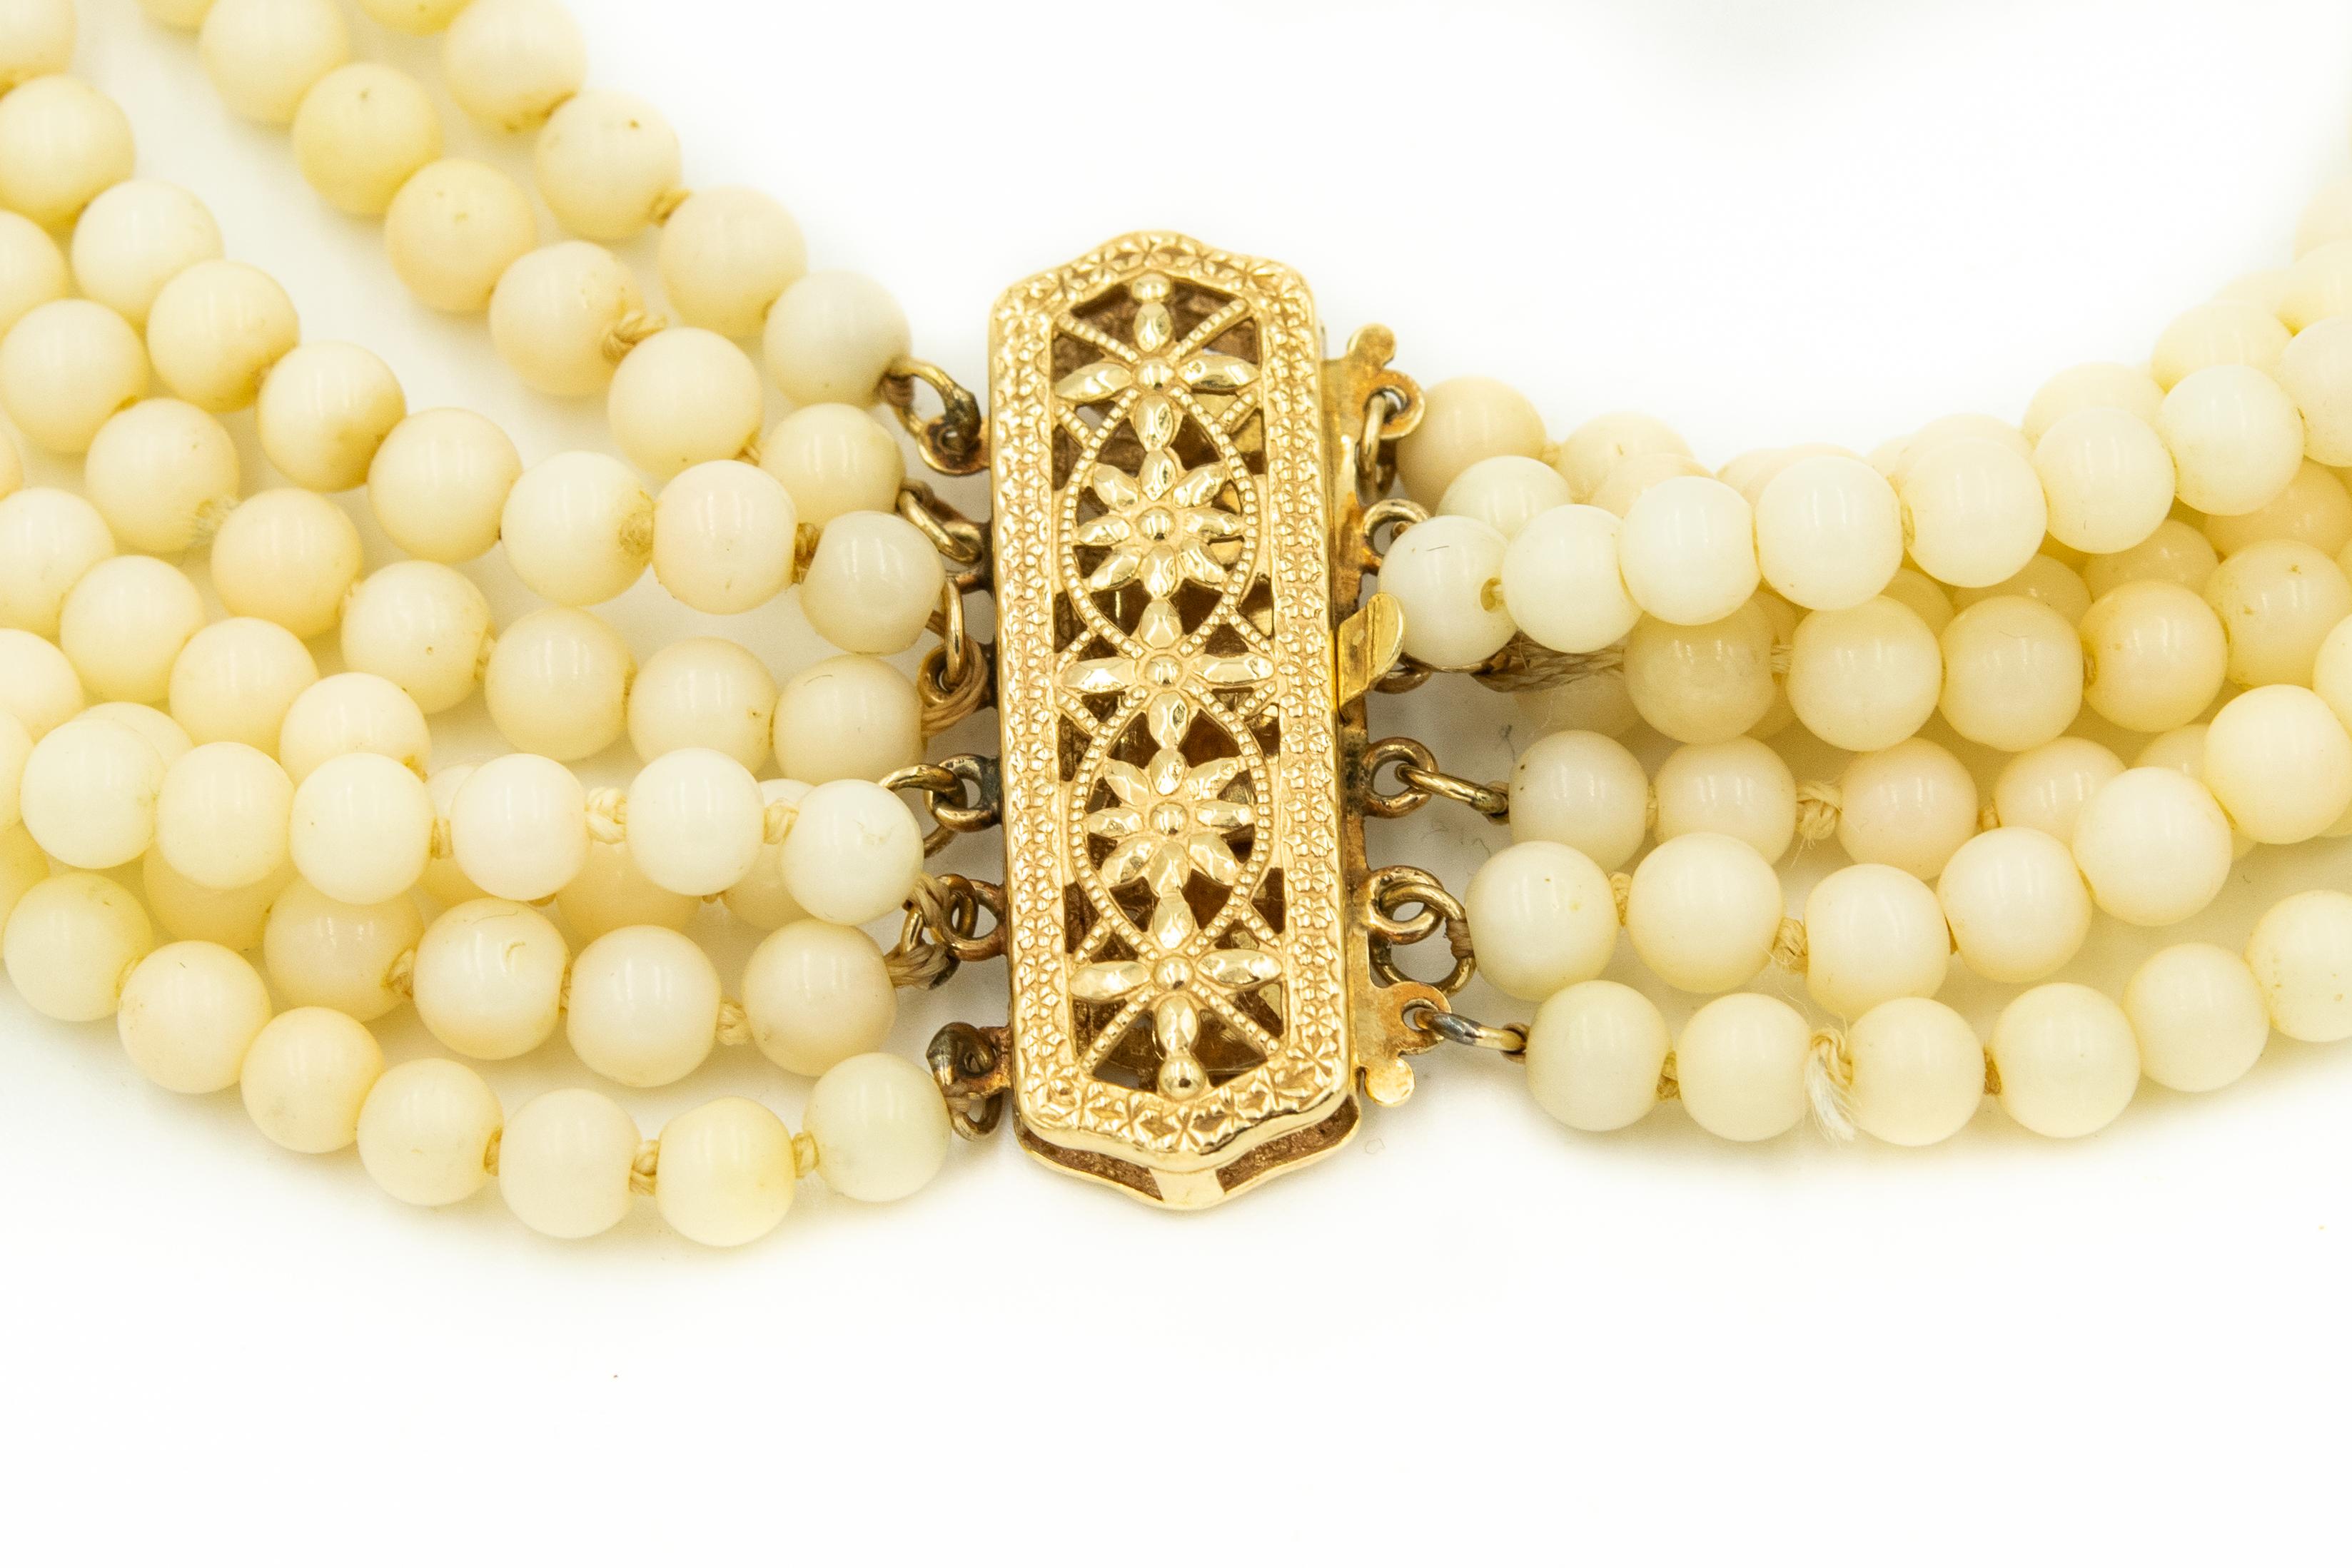 This elegant necklace features 8 strands of 4.66mm (approximately) very pale angel skin coral beads with an elongated 14k yellow gold floral flower filagree clasp.  